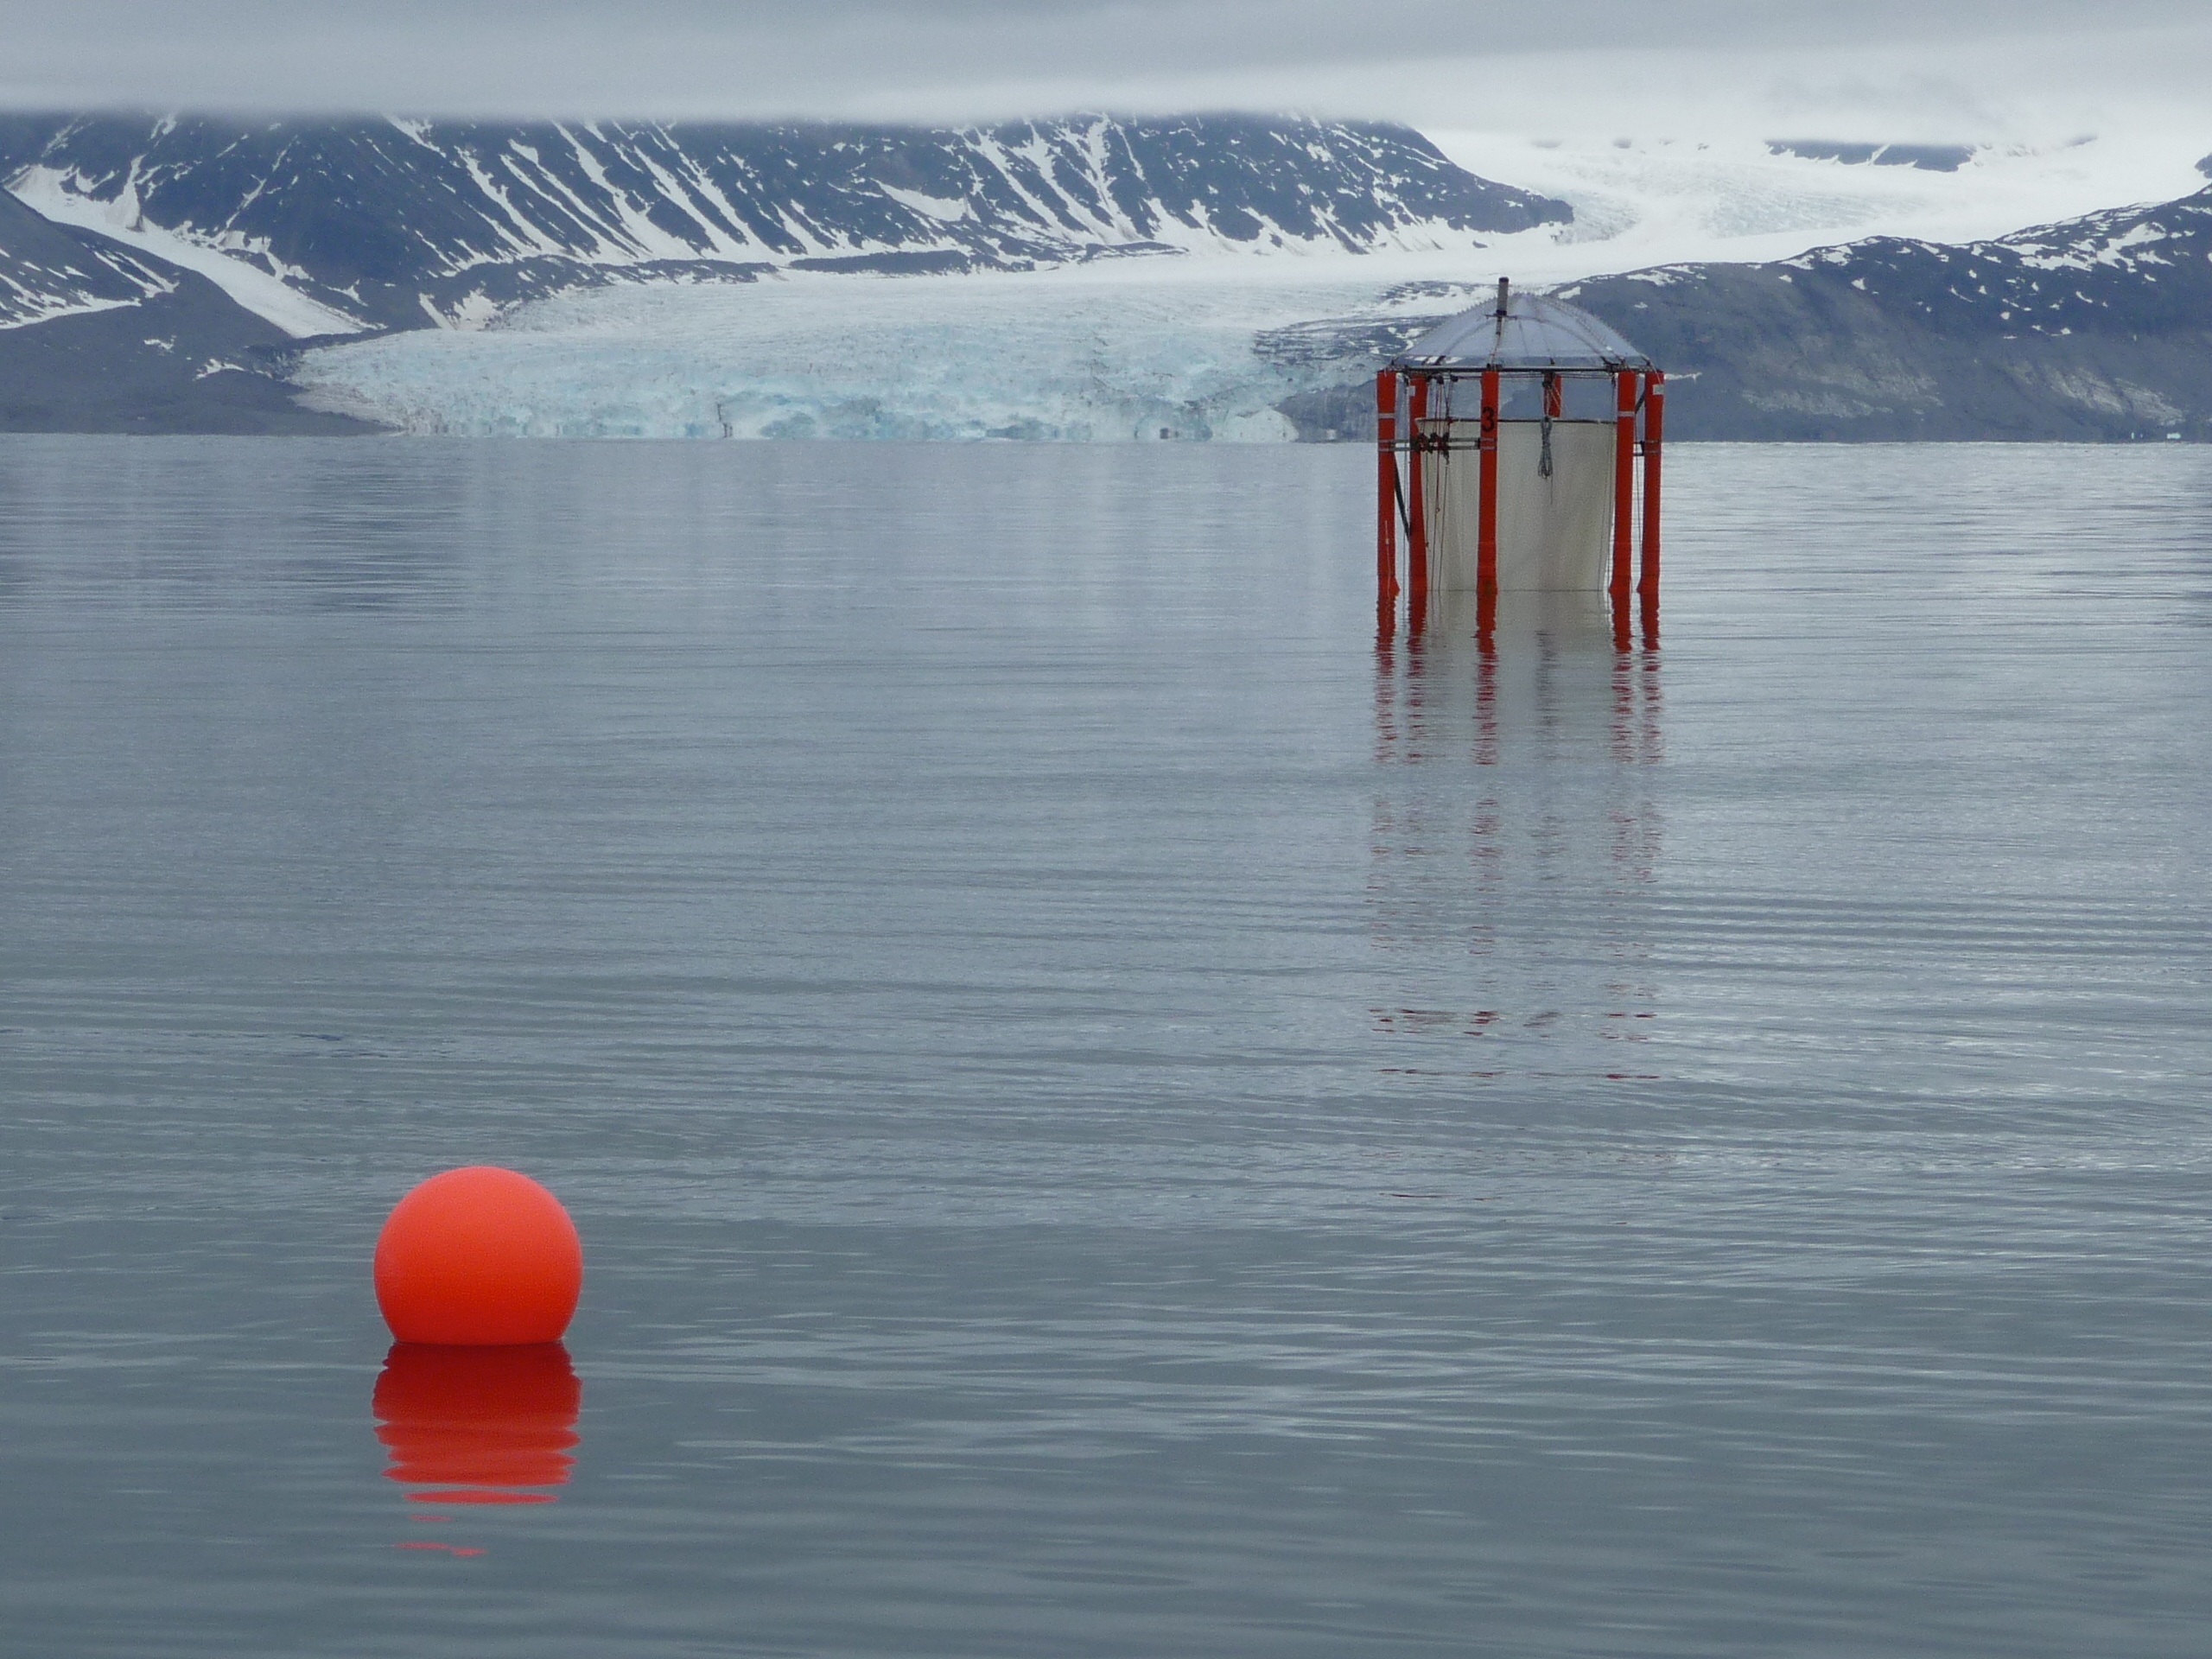 Svalbard 2010 mesocosm experiment. Mesocosm with a glacier in the background